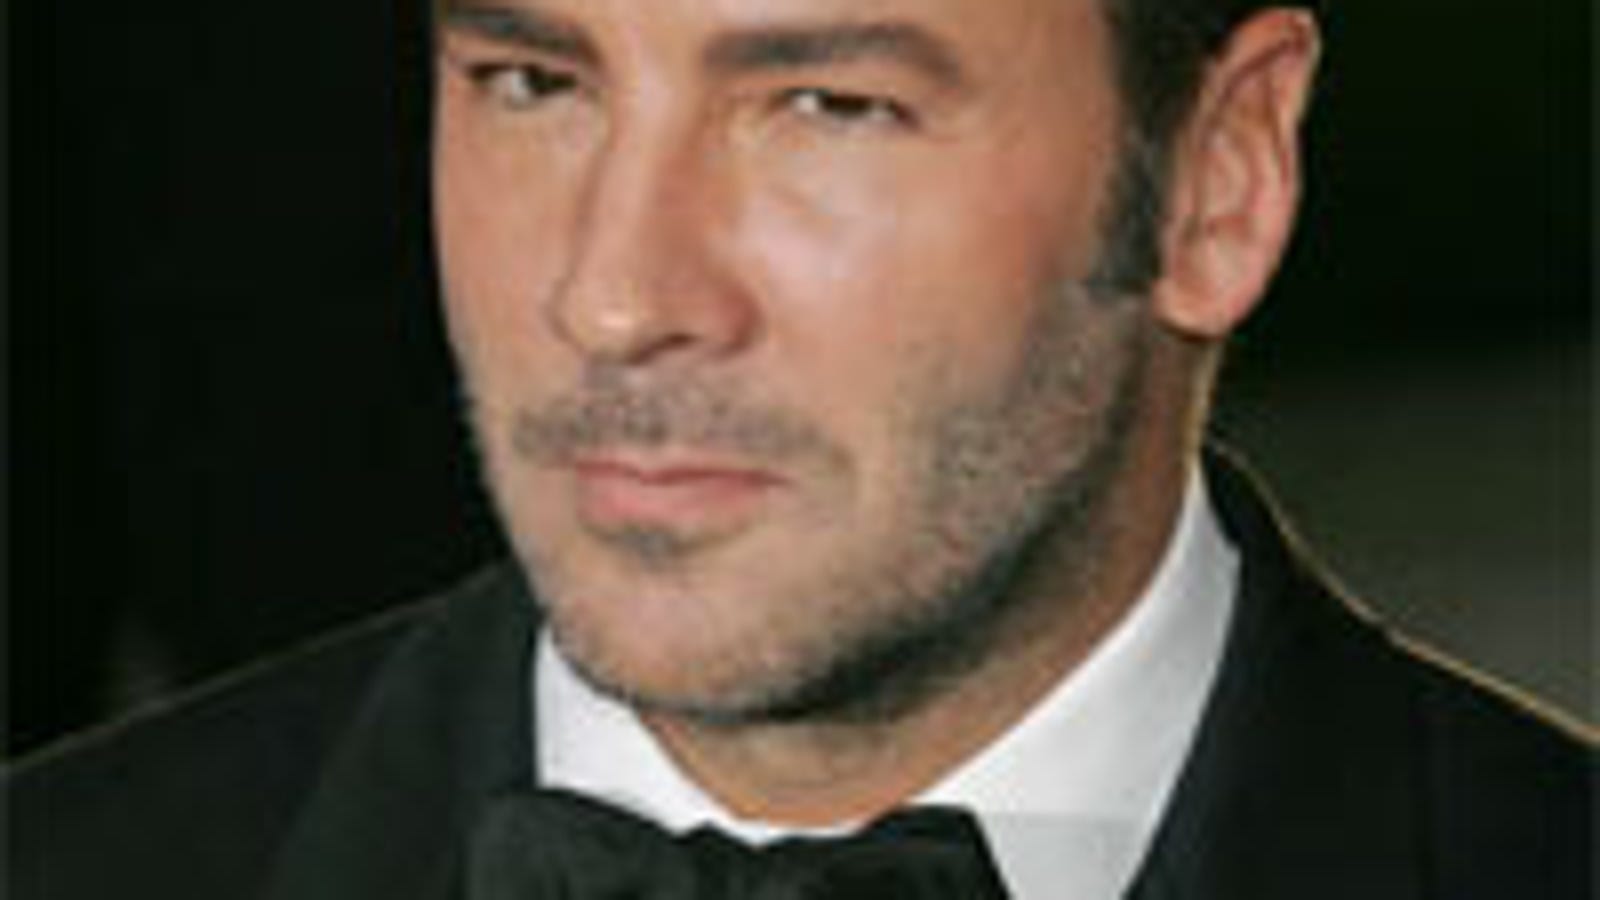 Tom Ford To Bequeath His Devastatingly Attractive Genes To A Baby?